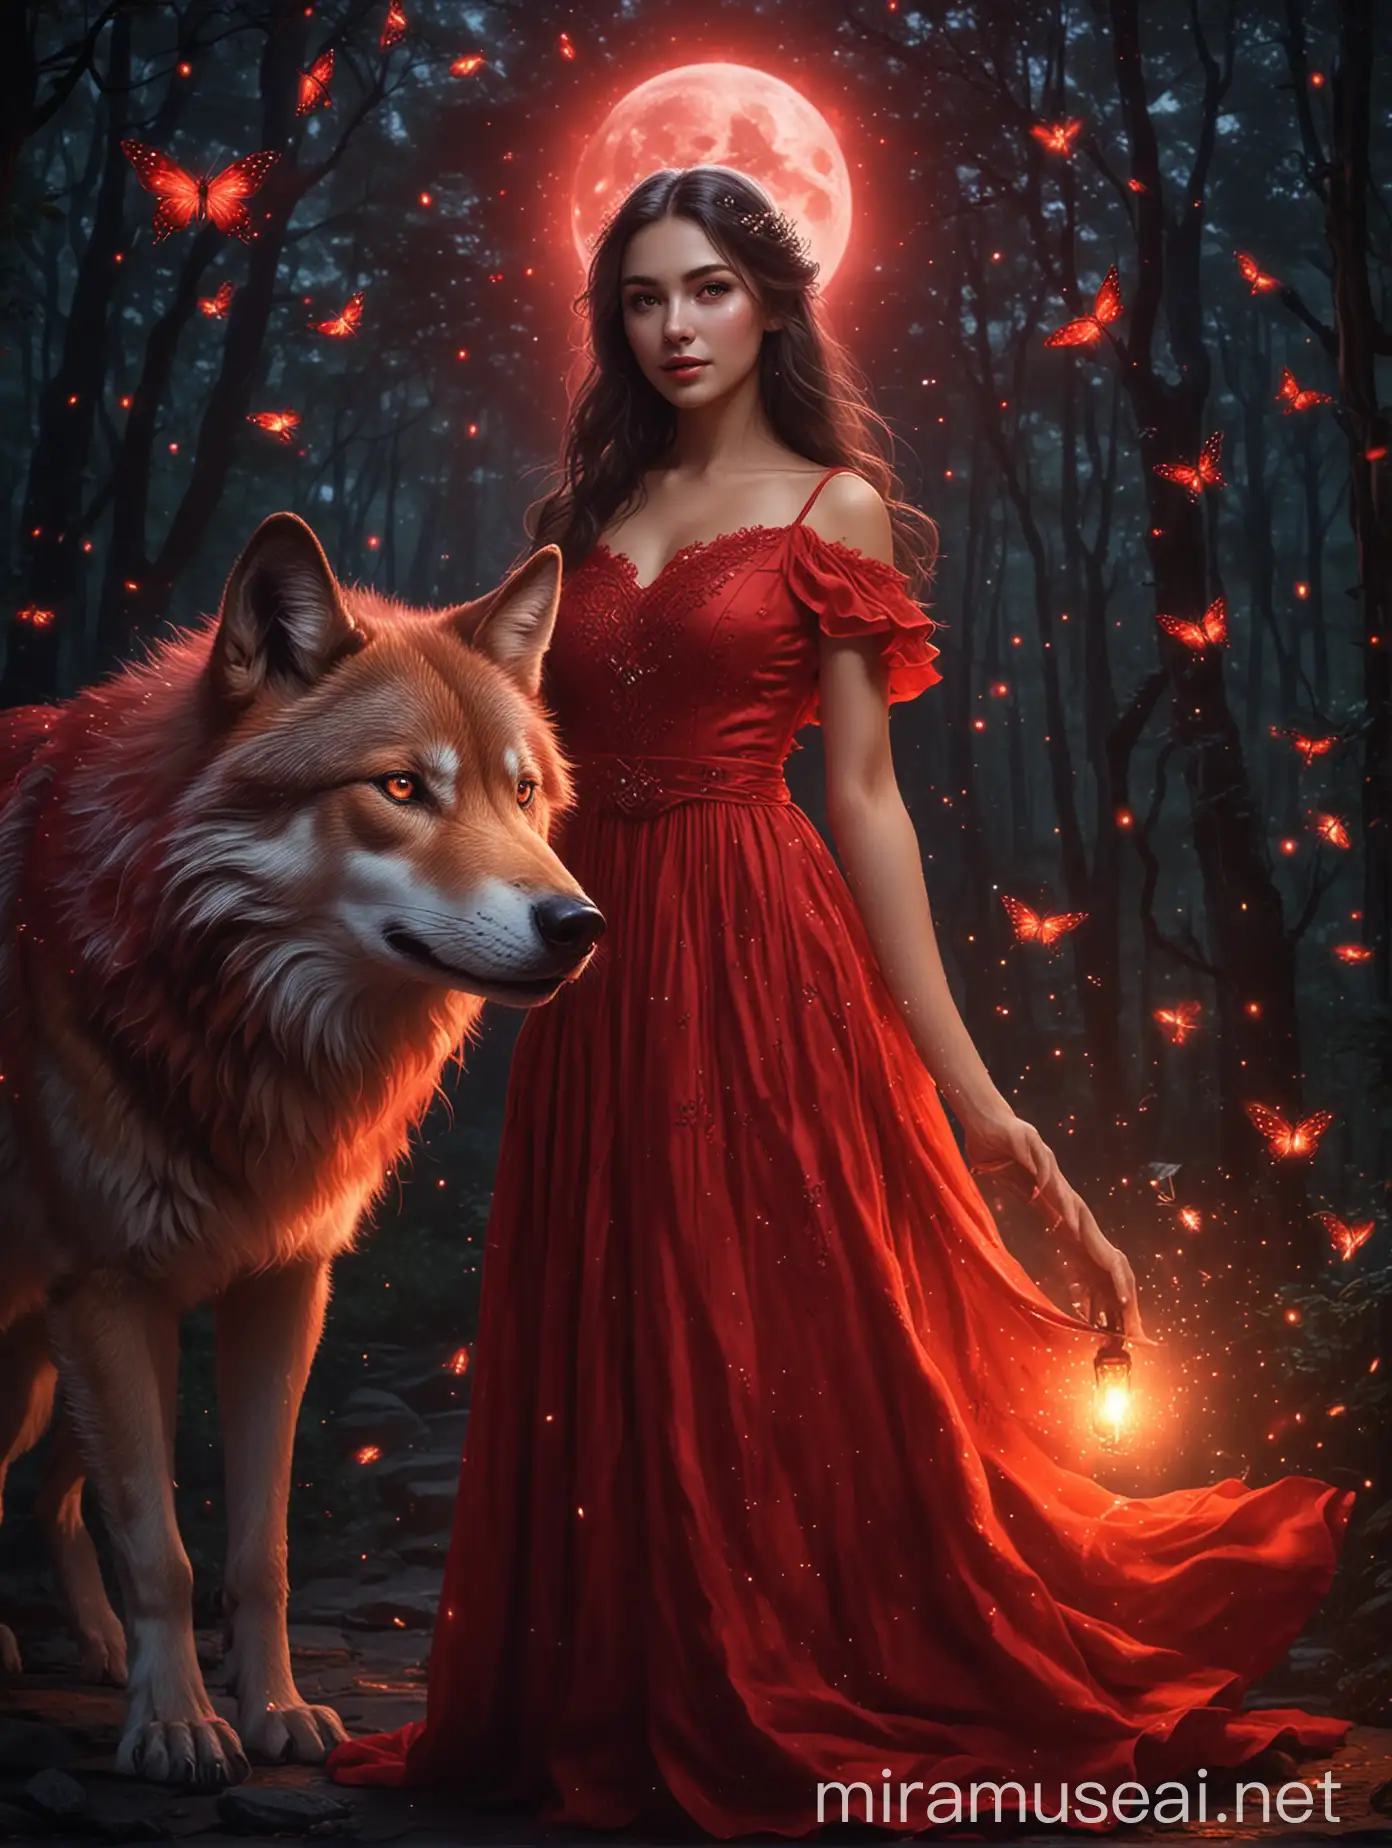 Elegant Woman with Luminous Wolf and Fireflies at Night